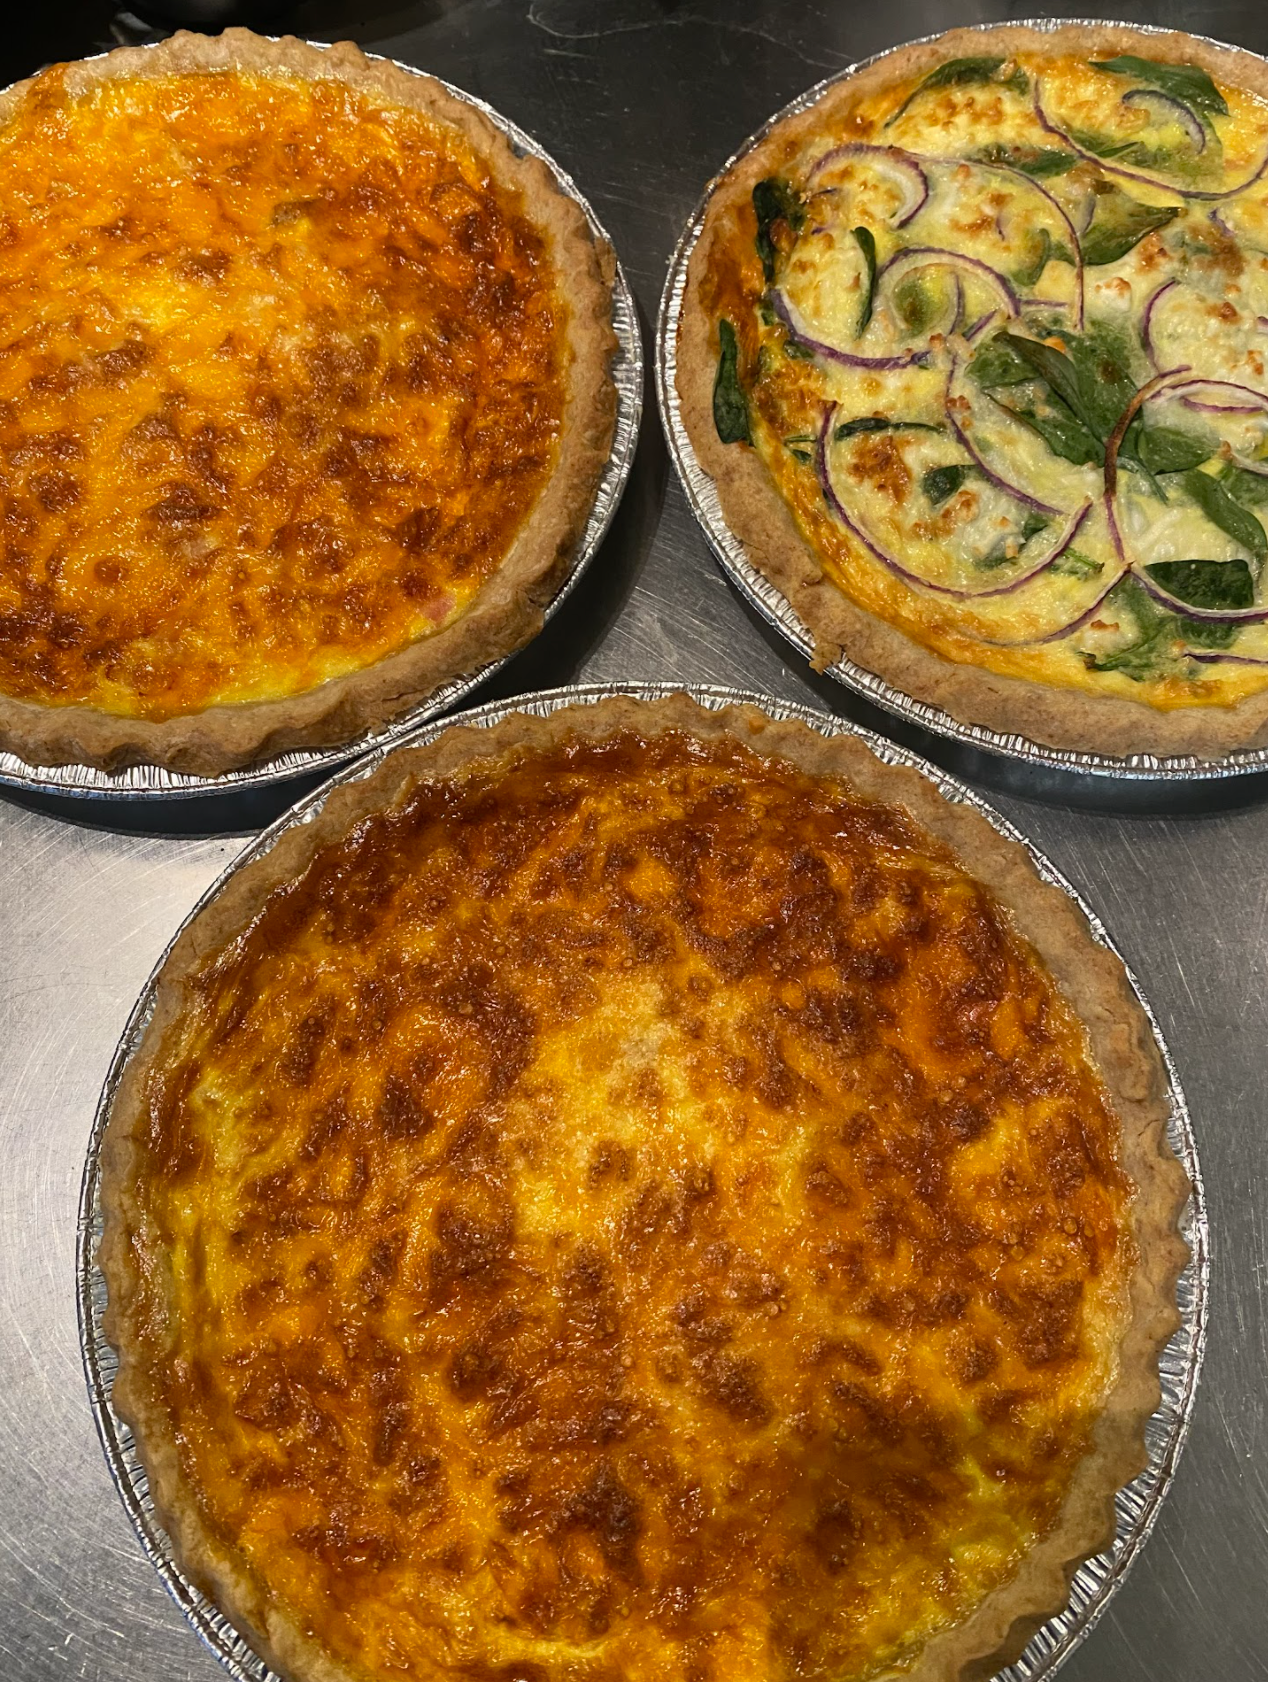 Two Ham & Cheddar full sized quiches, with a Spinach, Feta & Red Onion Quiche as well.